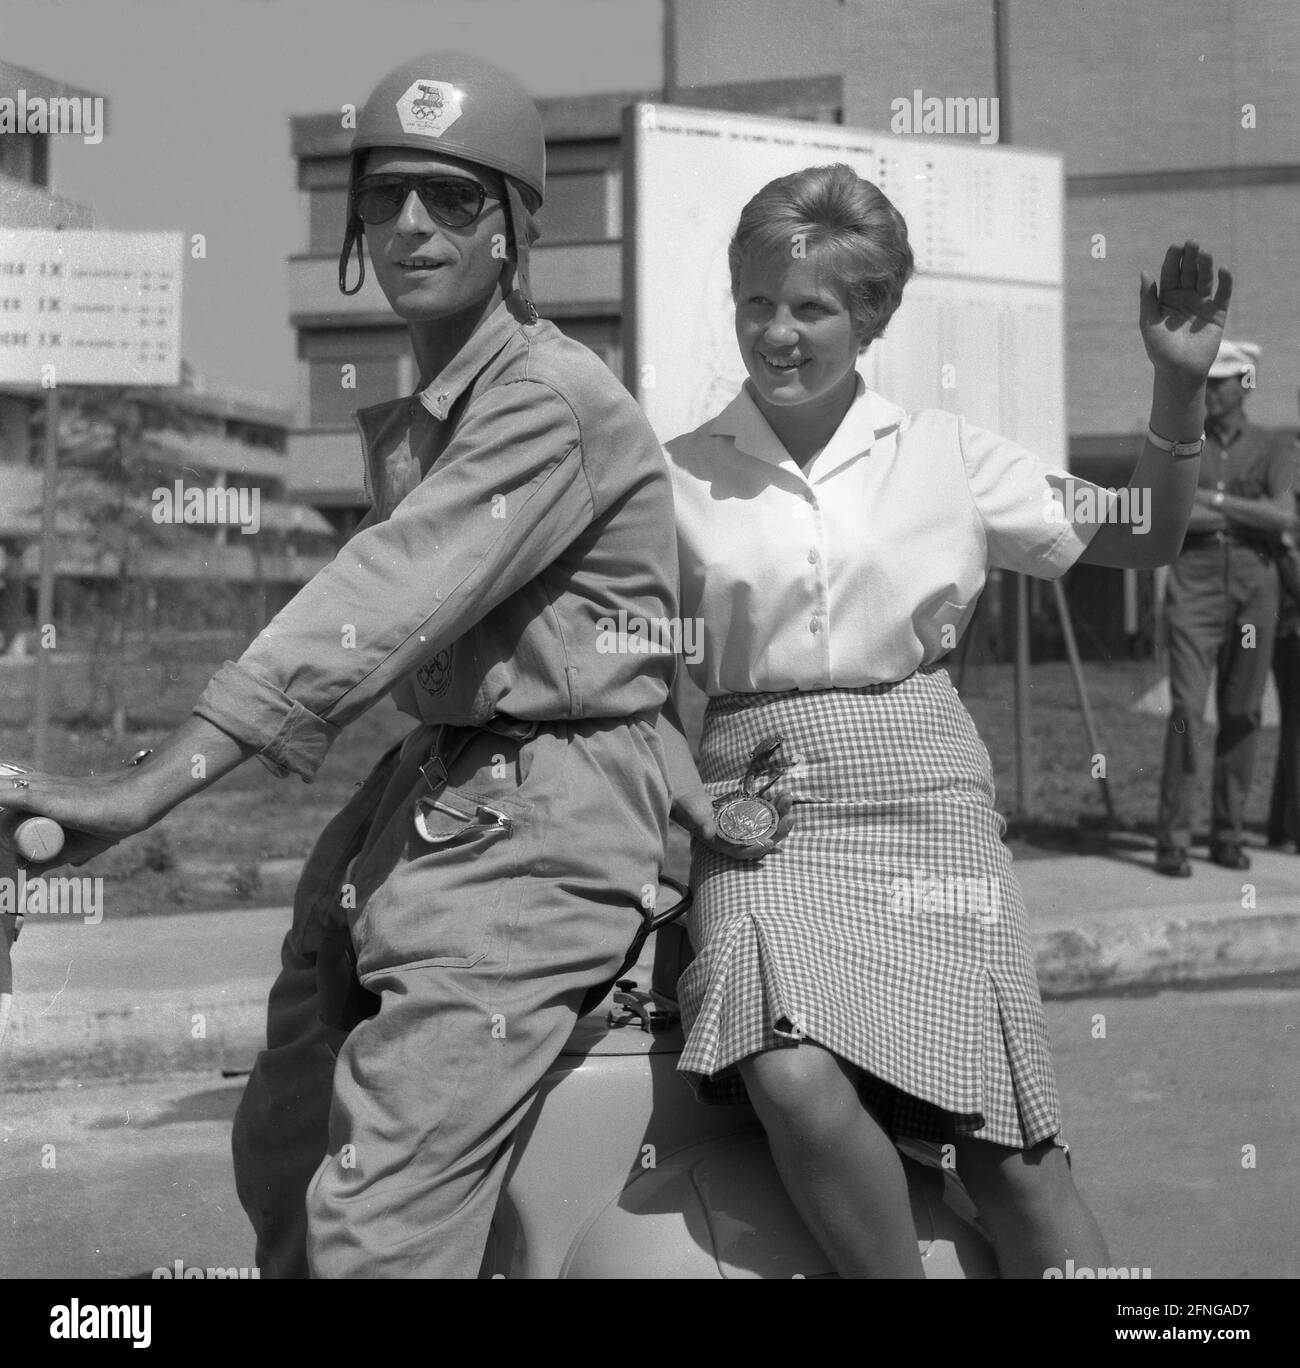 Olympic Games 1960 in Rome: Water diving: Ingrid Krämer (GER/GDR) with gold medal, here as pillion passenger on scooter. 28.08.1960. [automated translation] Stock Photo